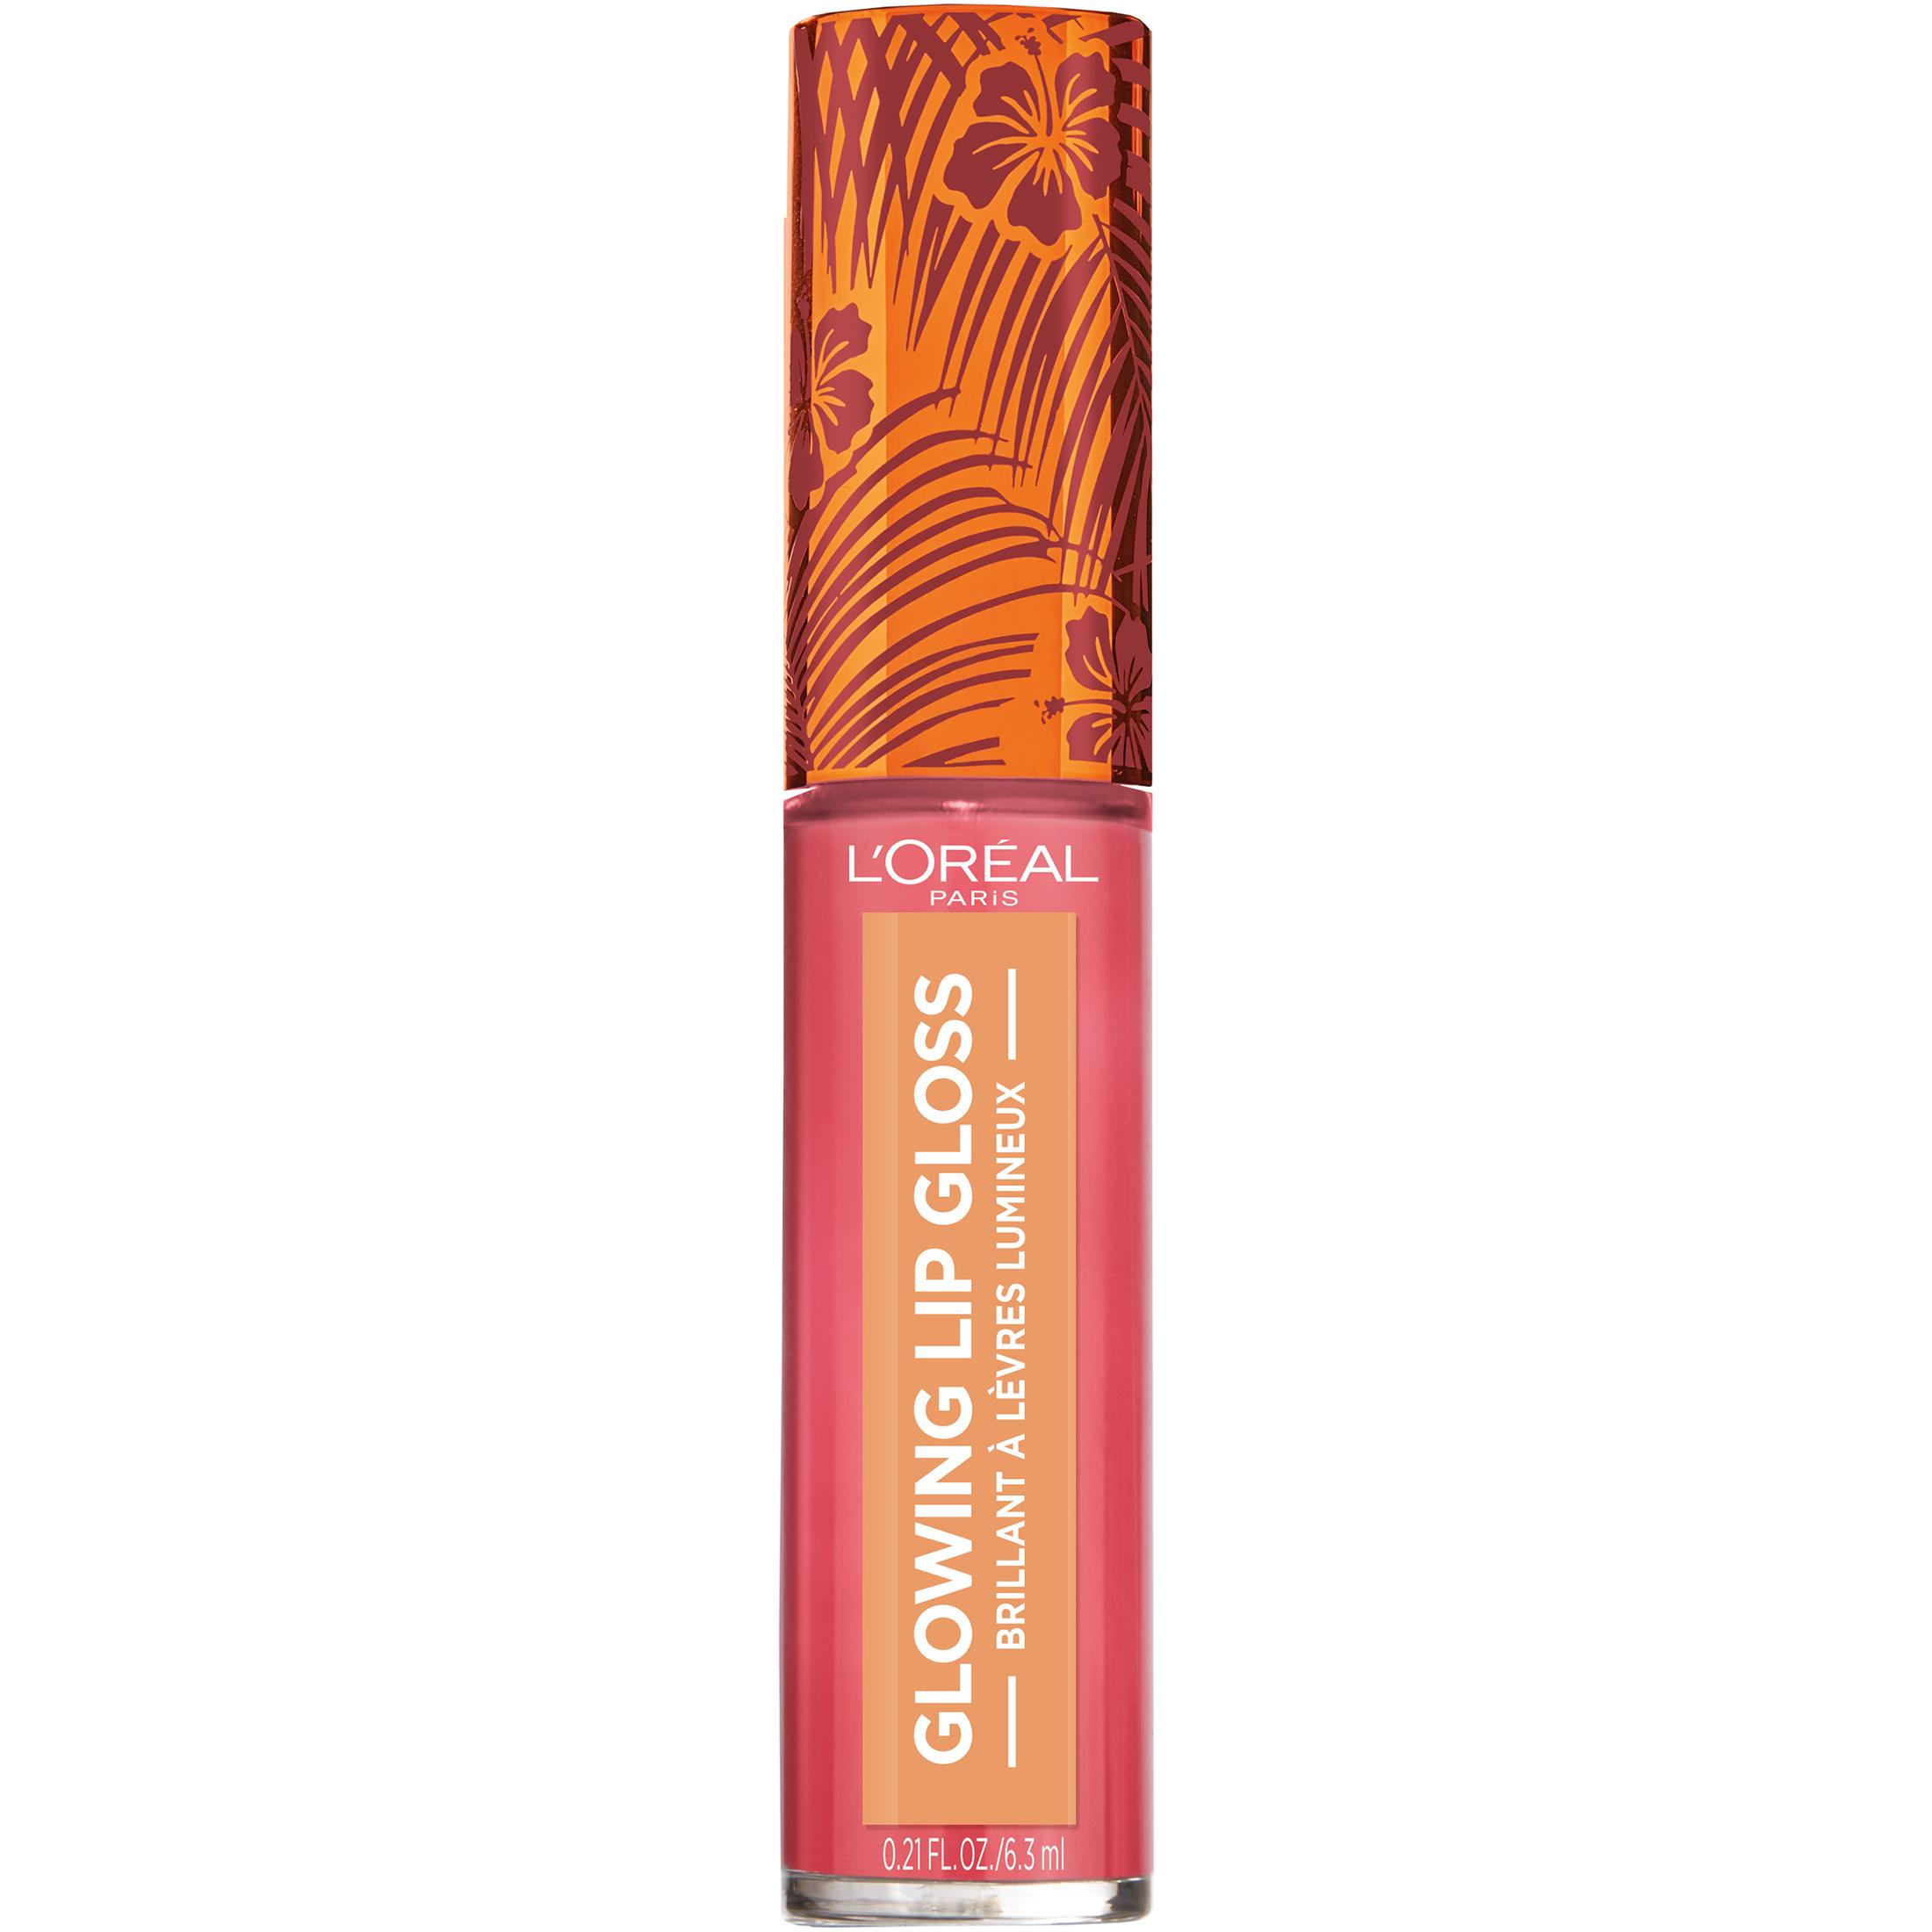 L'Oreal Paris Makeup Summer Belle Makeup Collection Glowing Lip Gloss, Tropic Like Its Hot - image 5 of 6